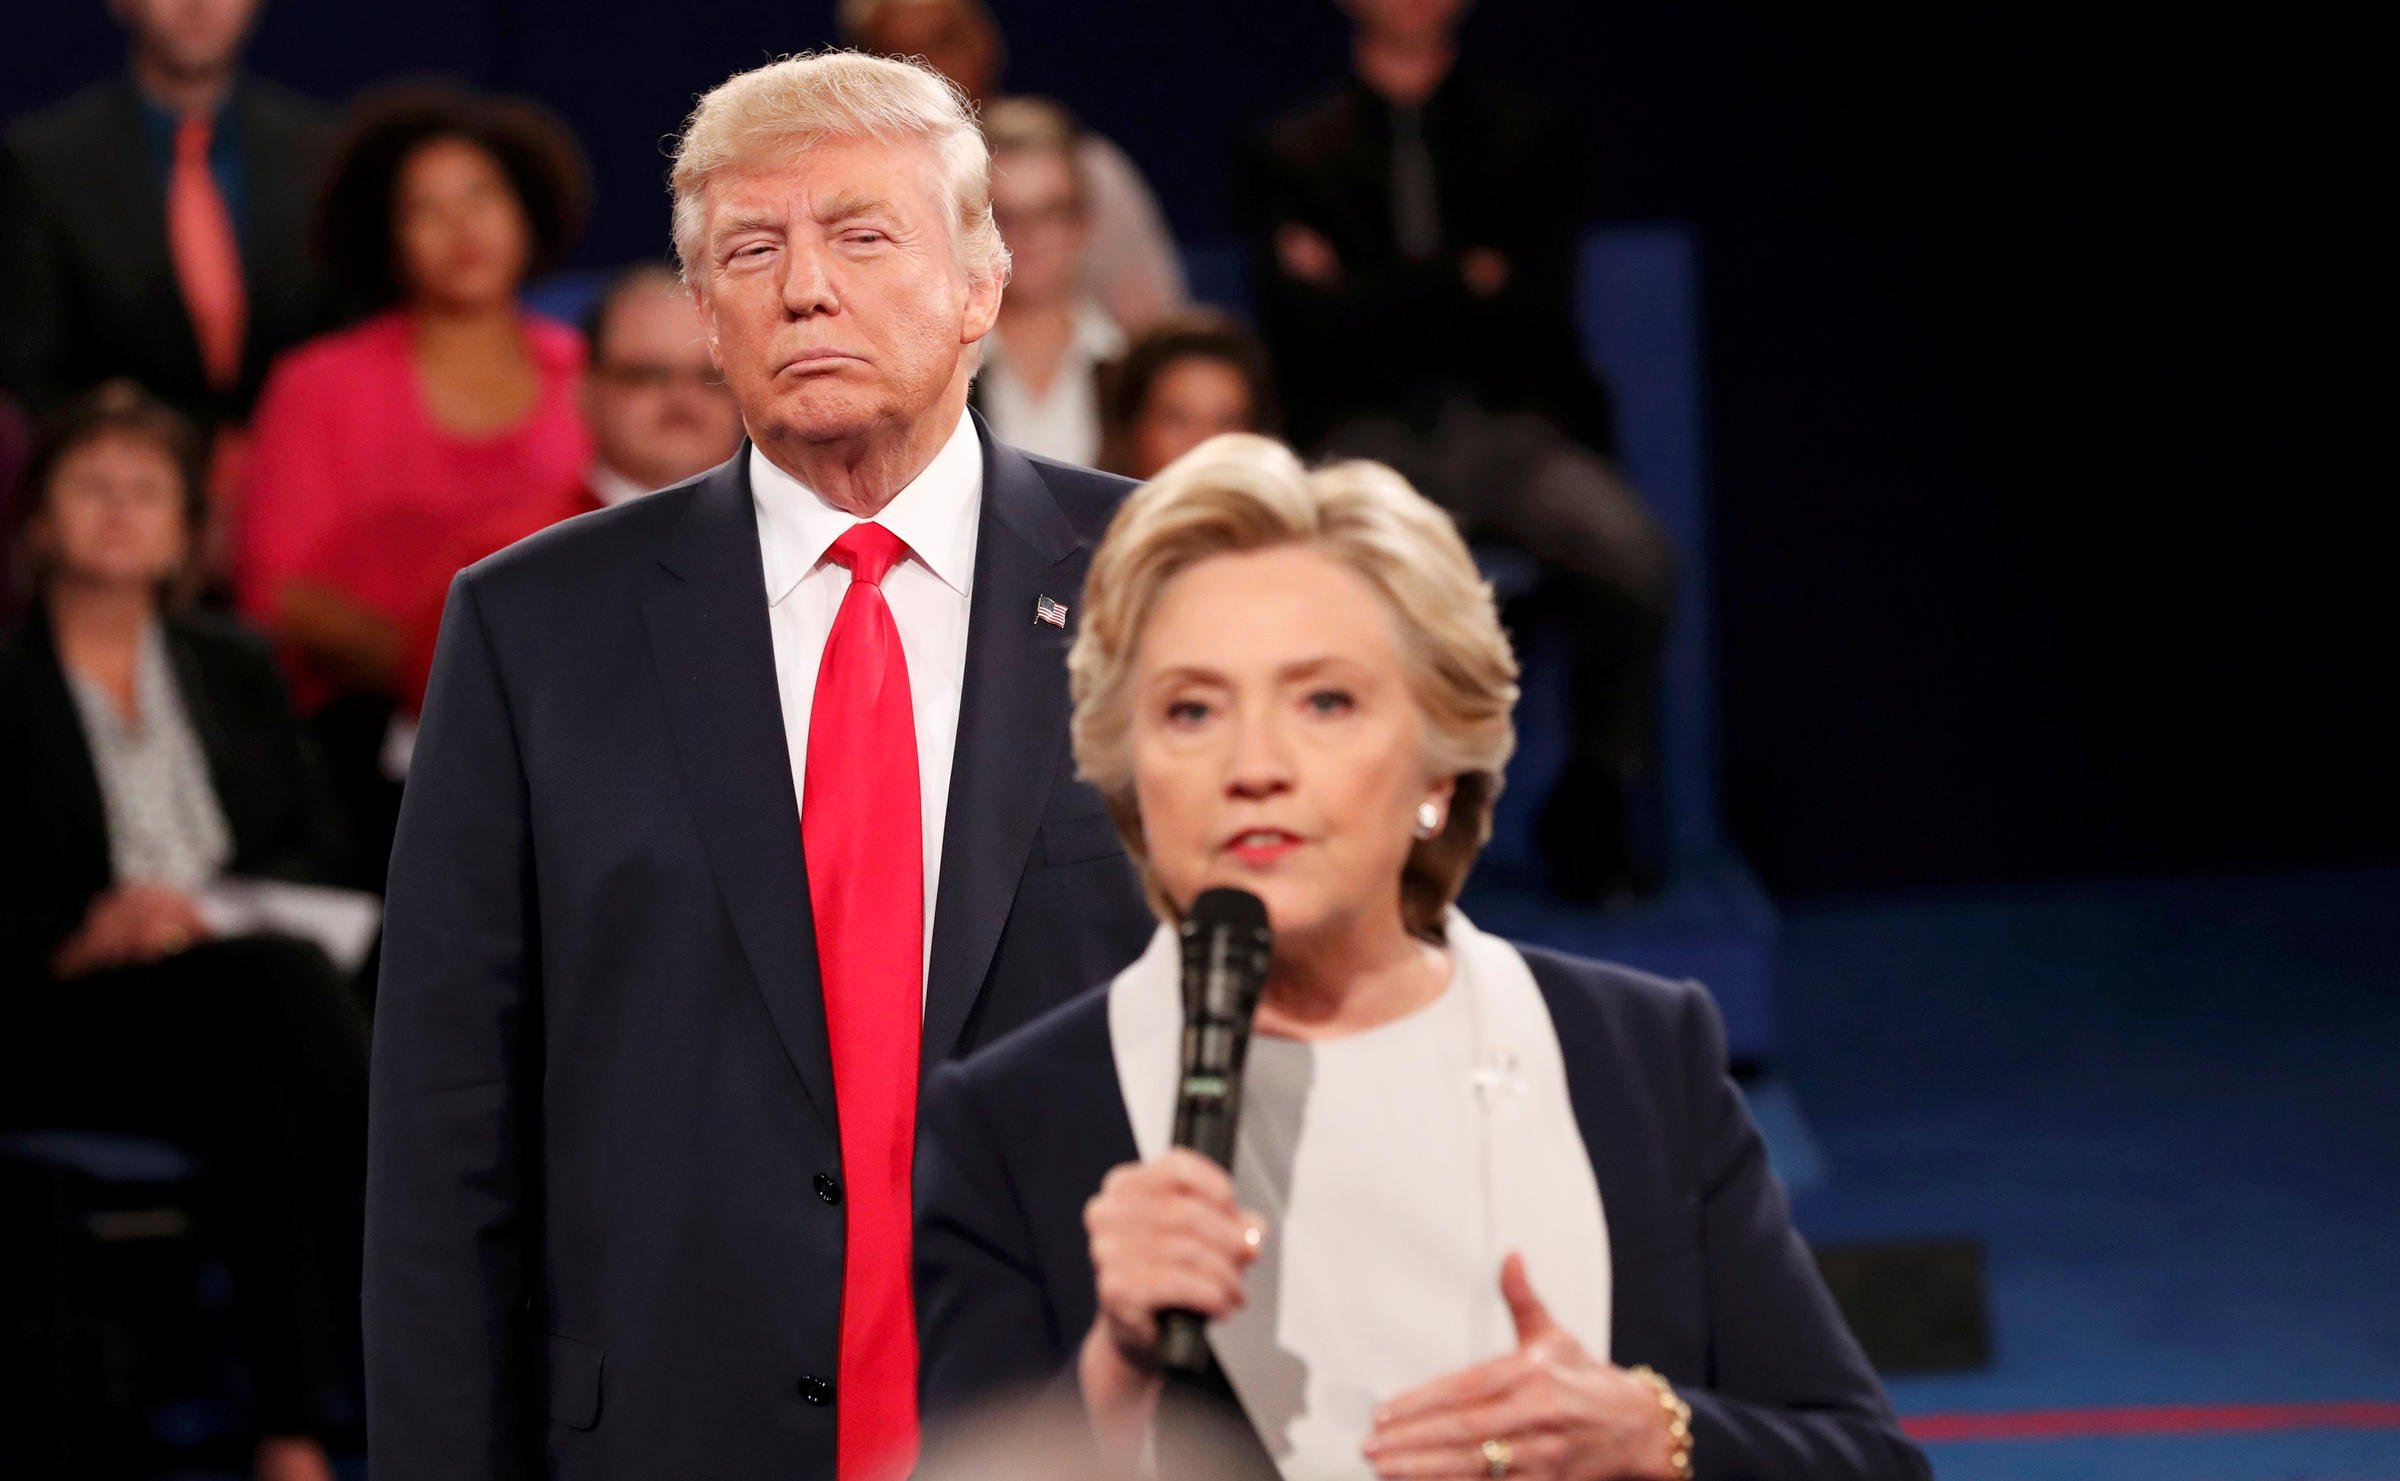 Donald Trump was the man Hillary Clinton needed to win the women's vote | WUNC